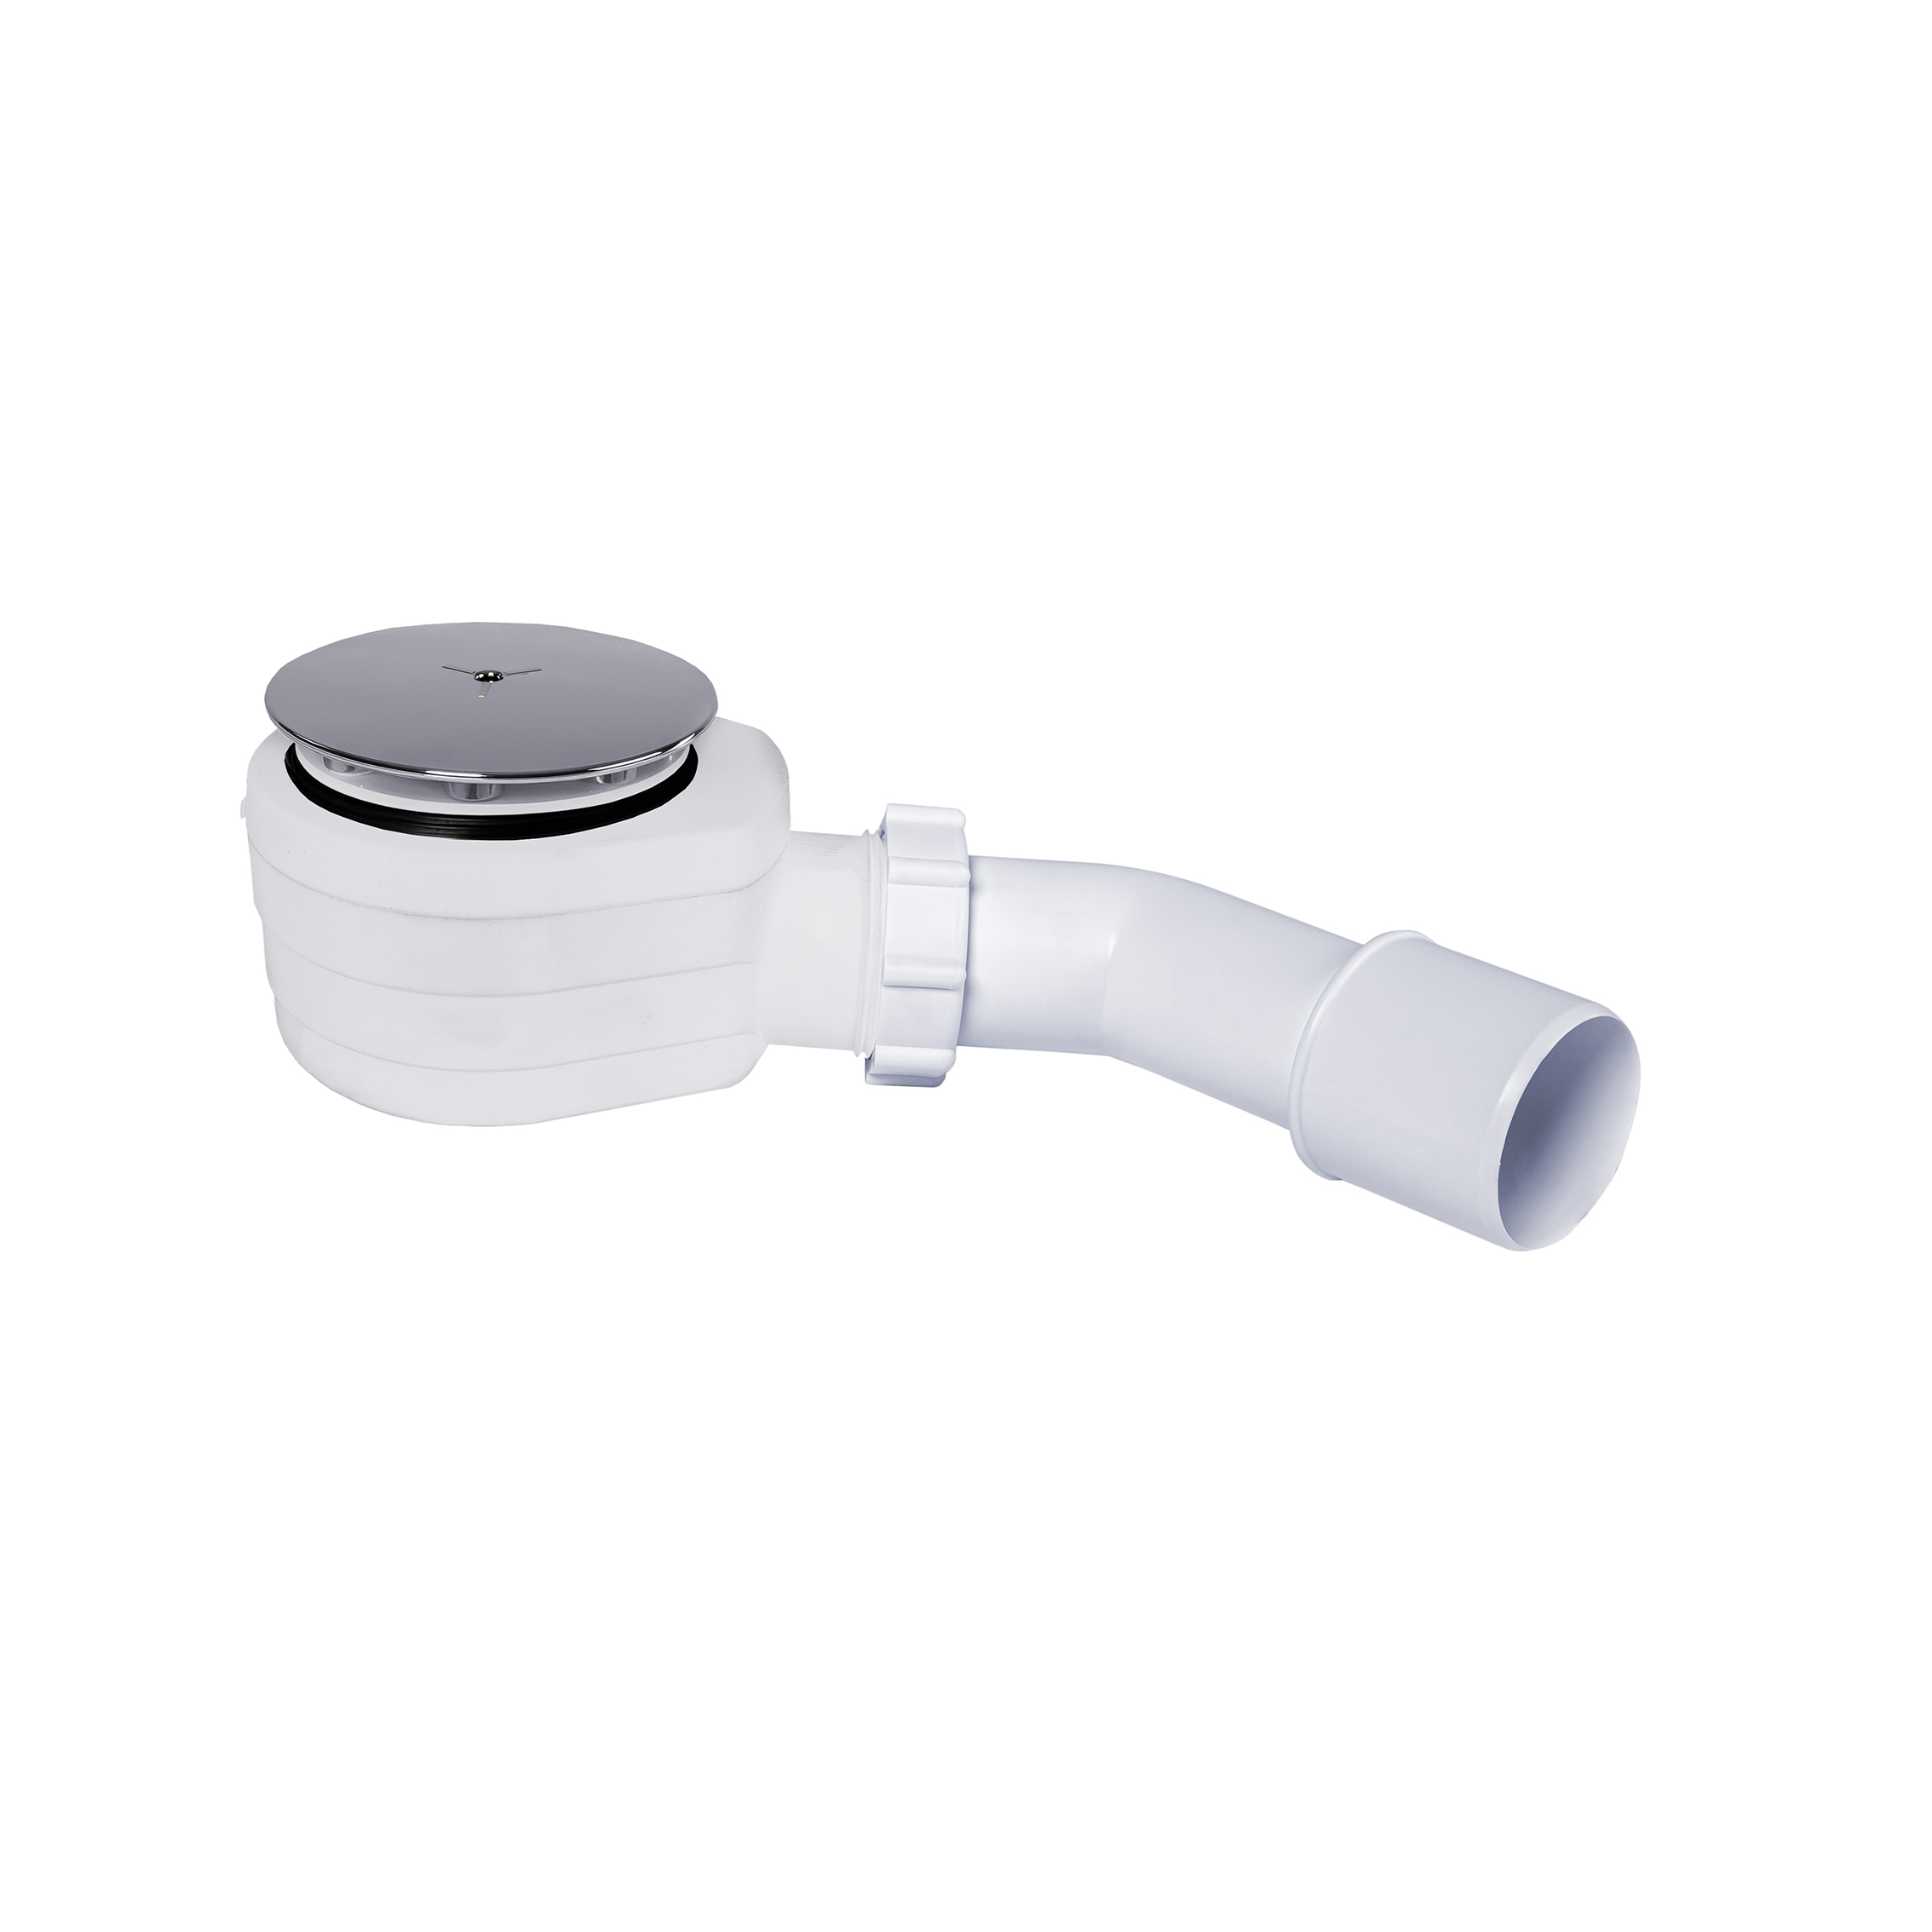 Ø60 mm shower trap, chrome covered, 60 mm height